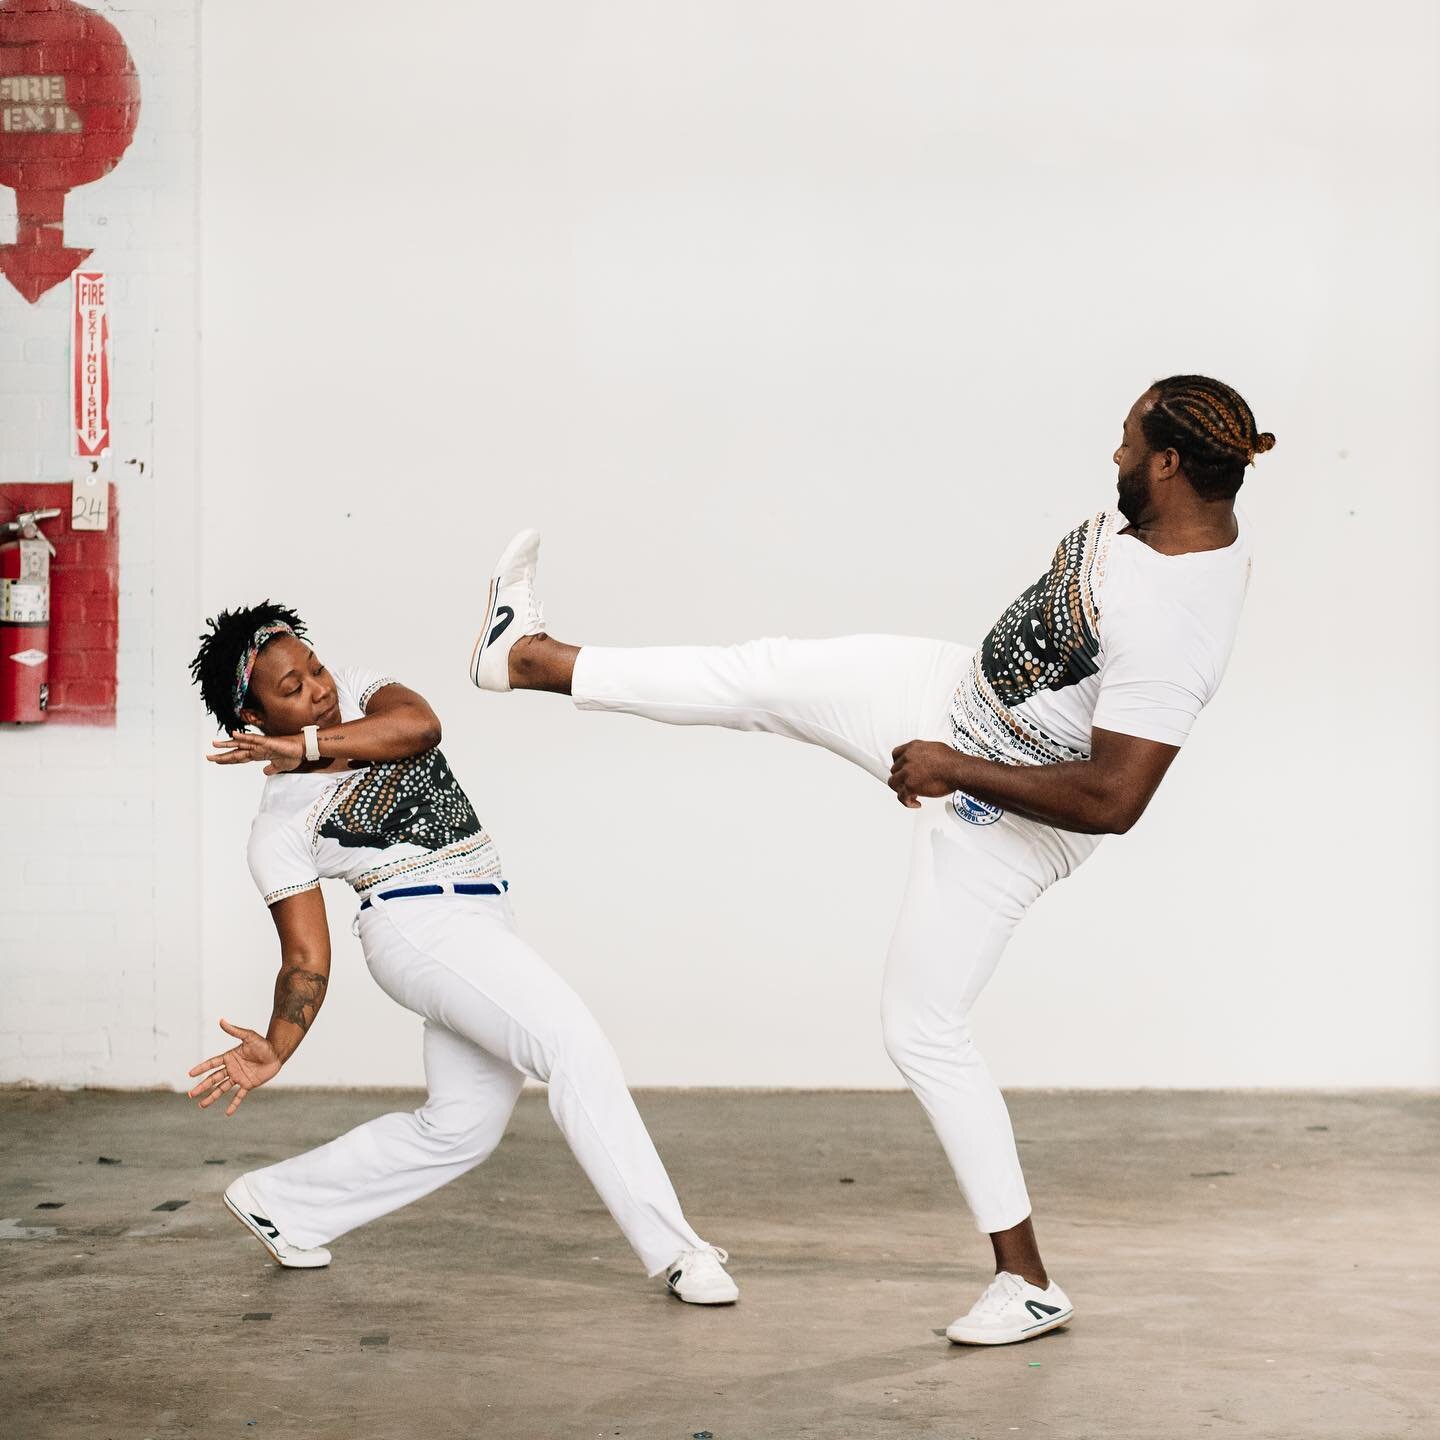 Capoeira is a unique art that can give you a lot of things if you desire to seek it.

📸 @n_rose_j 

#capoeira #charottecapoeira #qcgingaproject #art #movement #expression